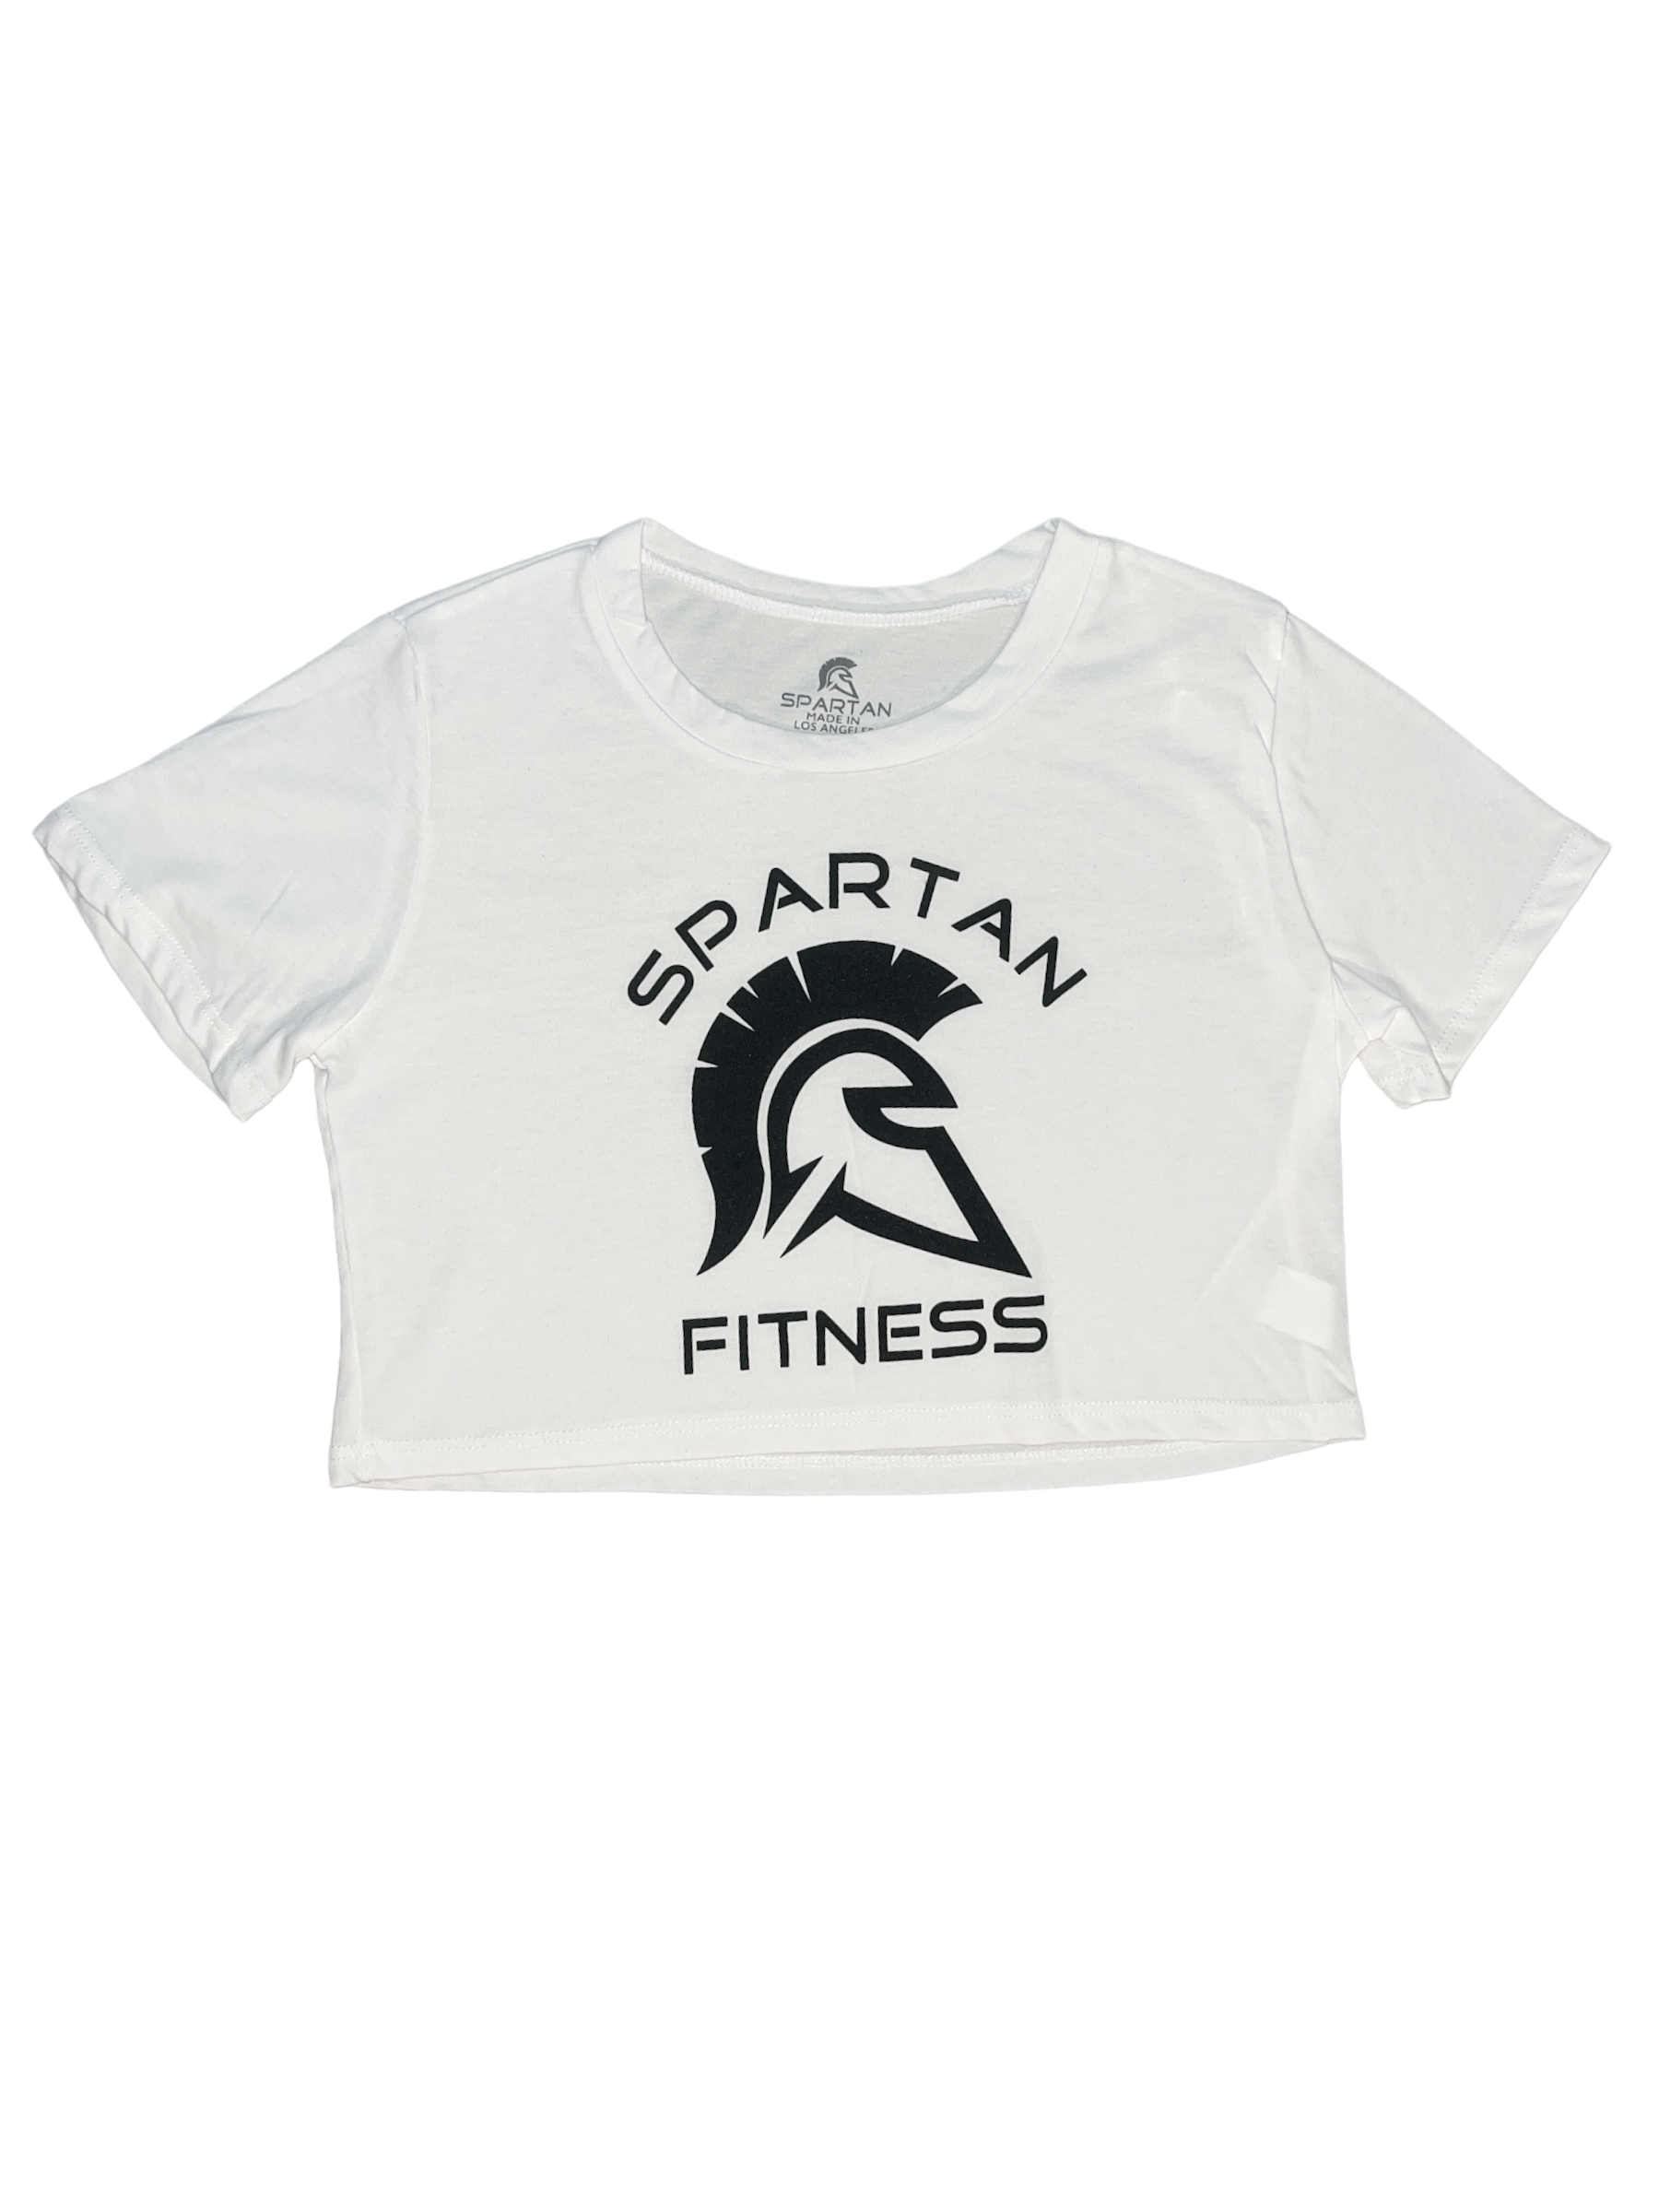 SPARTAN by CRAFT Hypervent Cropped Top - Women's